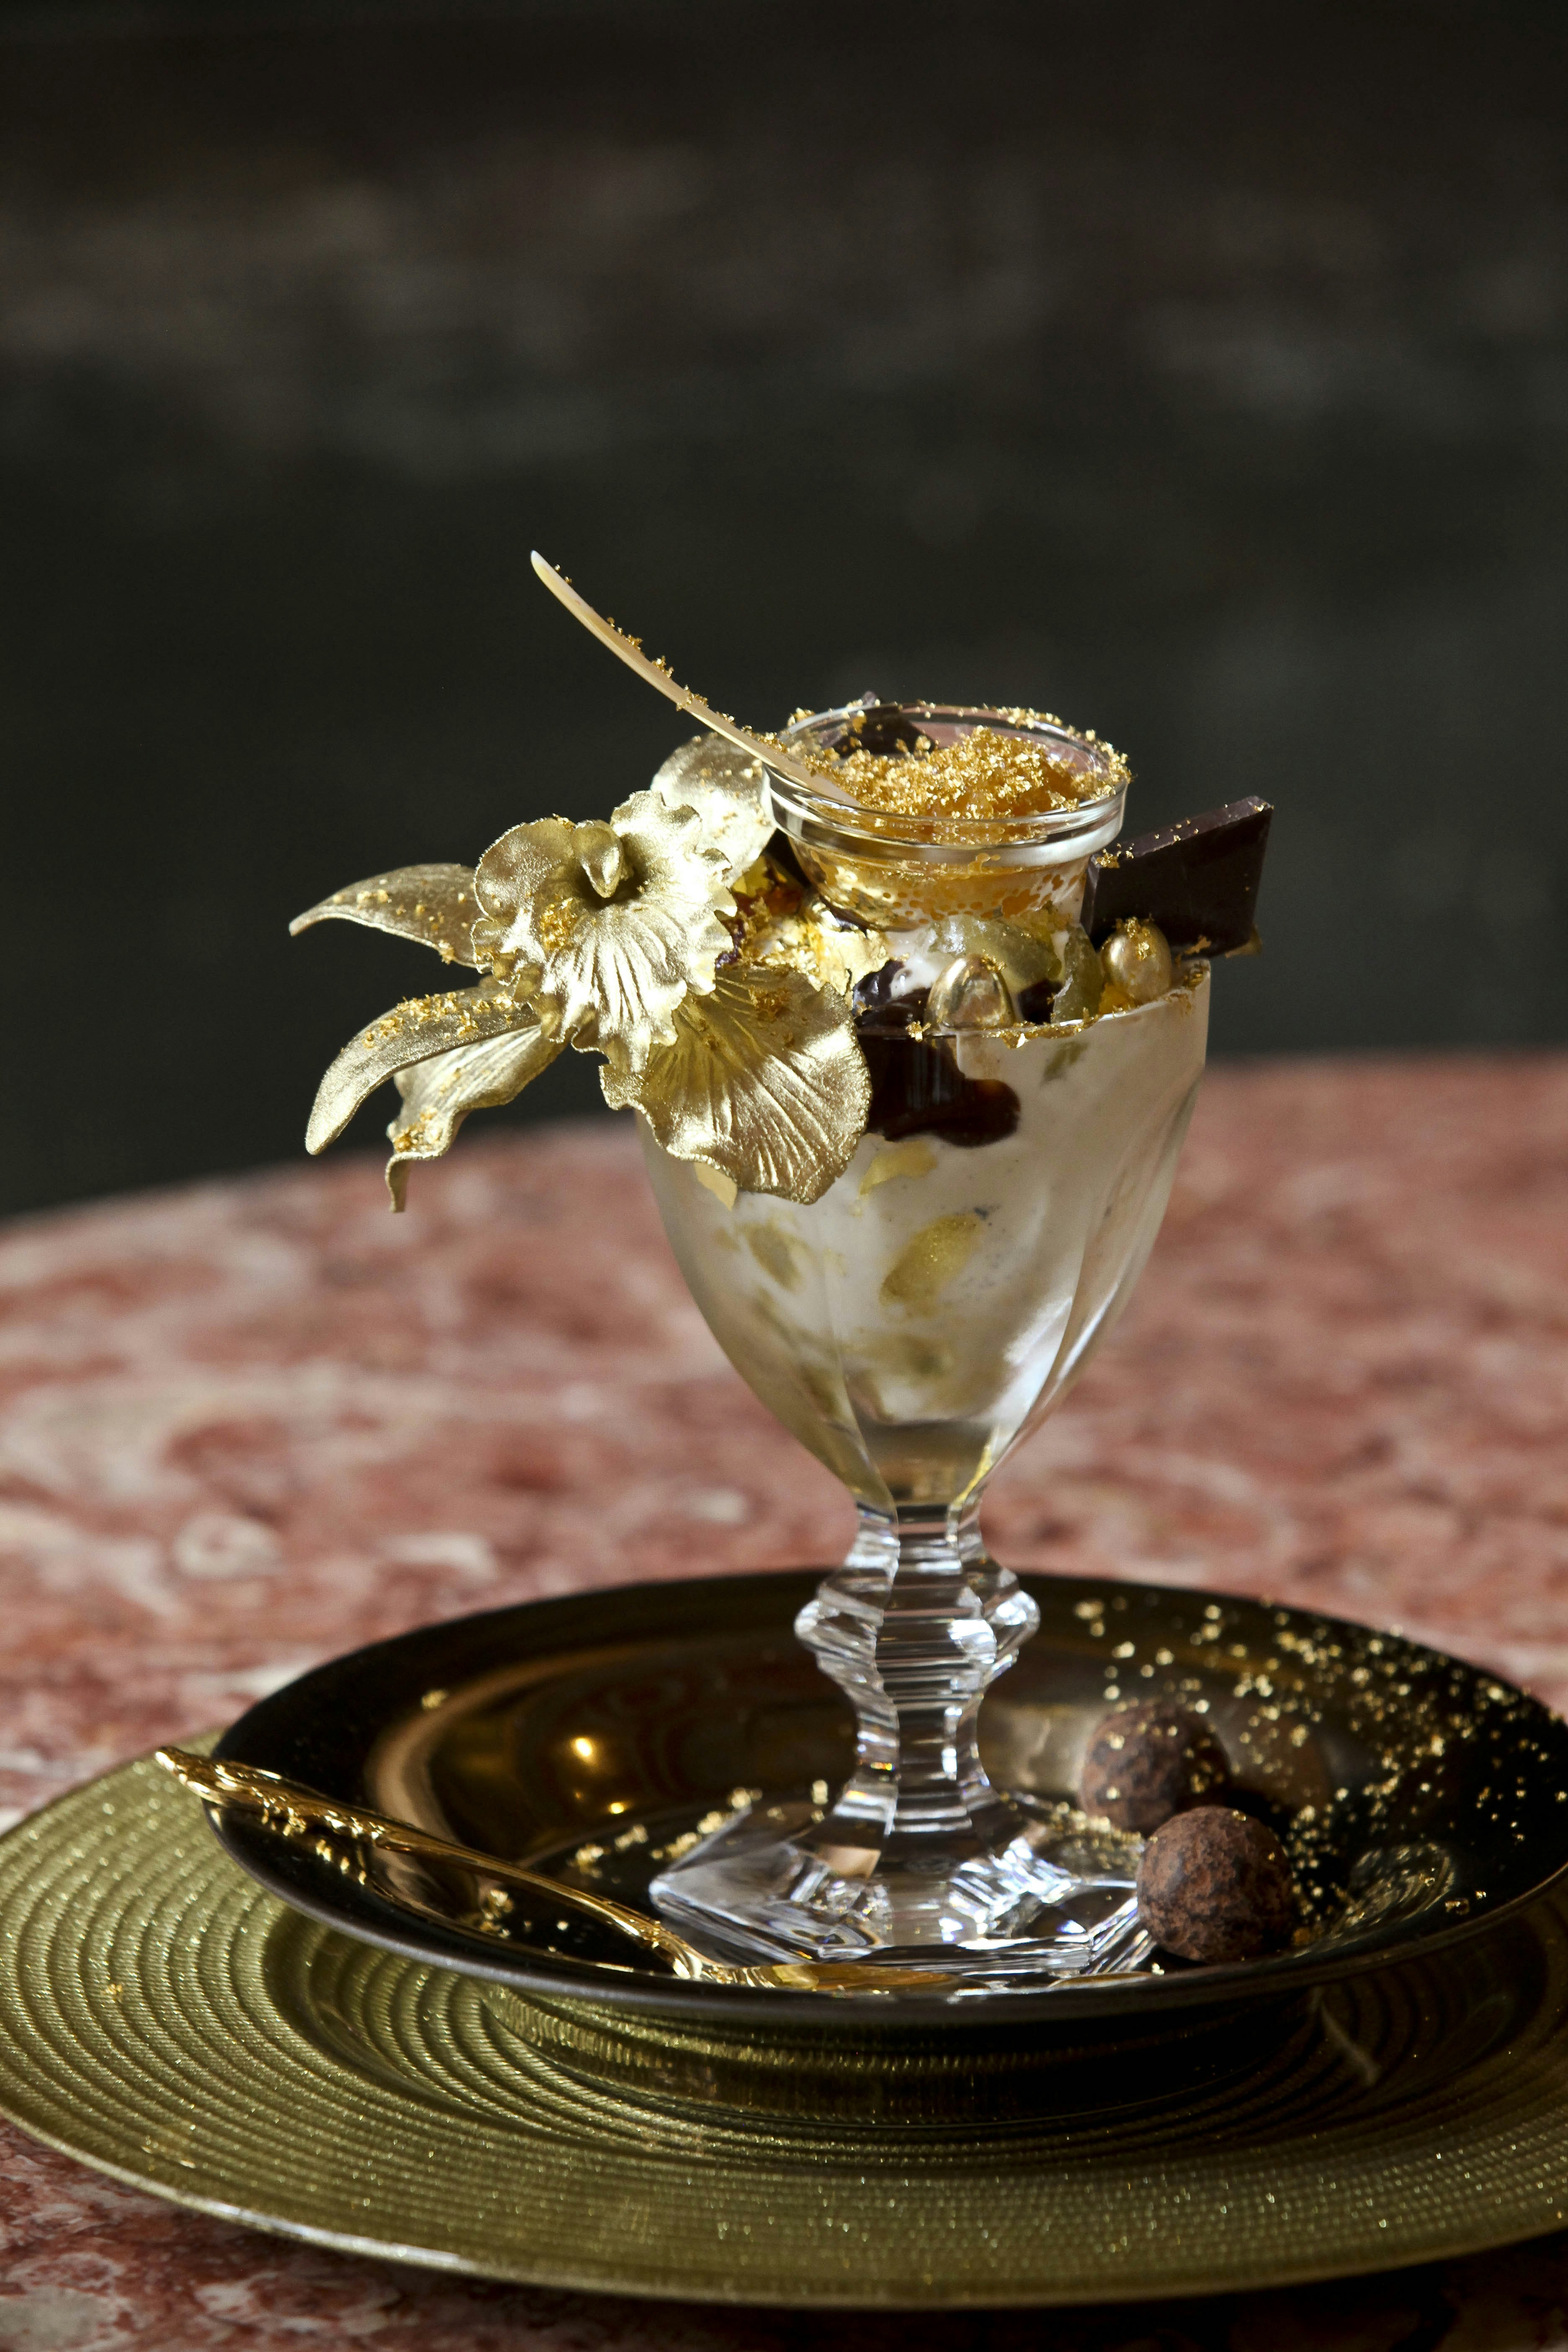 A small container of gold-dusted caviar rests atop an ice cream sundae of vanilla ice cream filled with Chuao chocolate, golden pieces of candy and garnished with a sugar forged orchid. There is a golden spoon resting at the base of the $350 Baccarat Harcourt crystal goblet